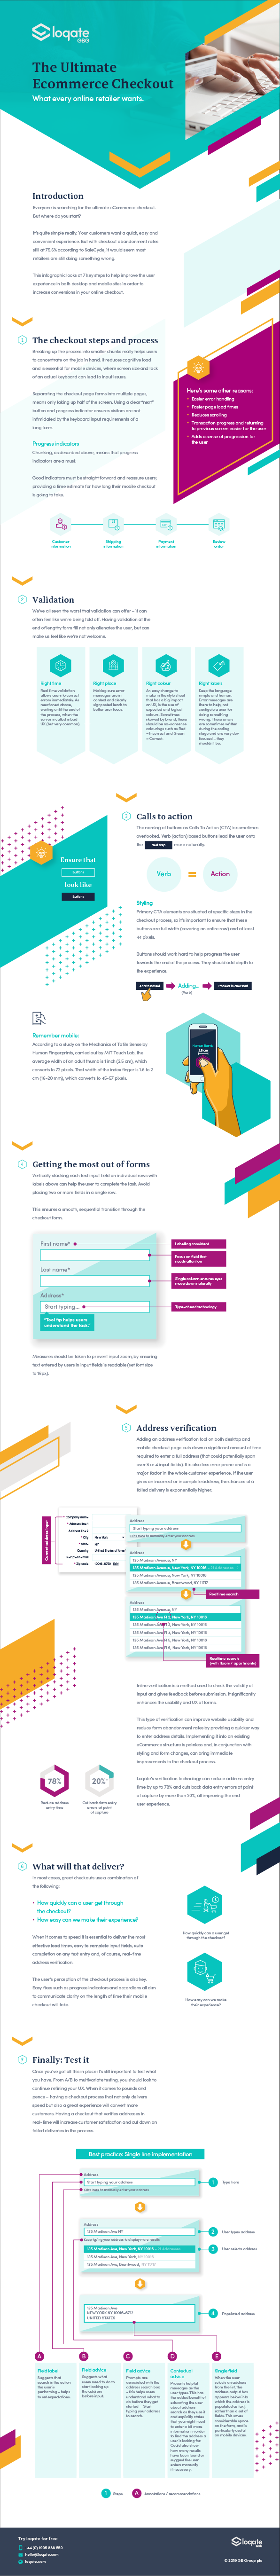 The perfect ecommerce checkout infographic by Loqate